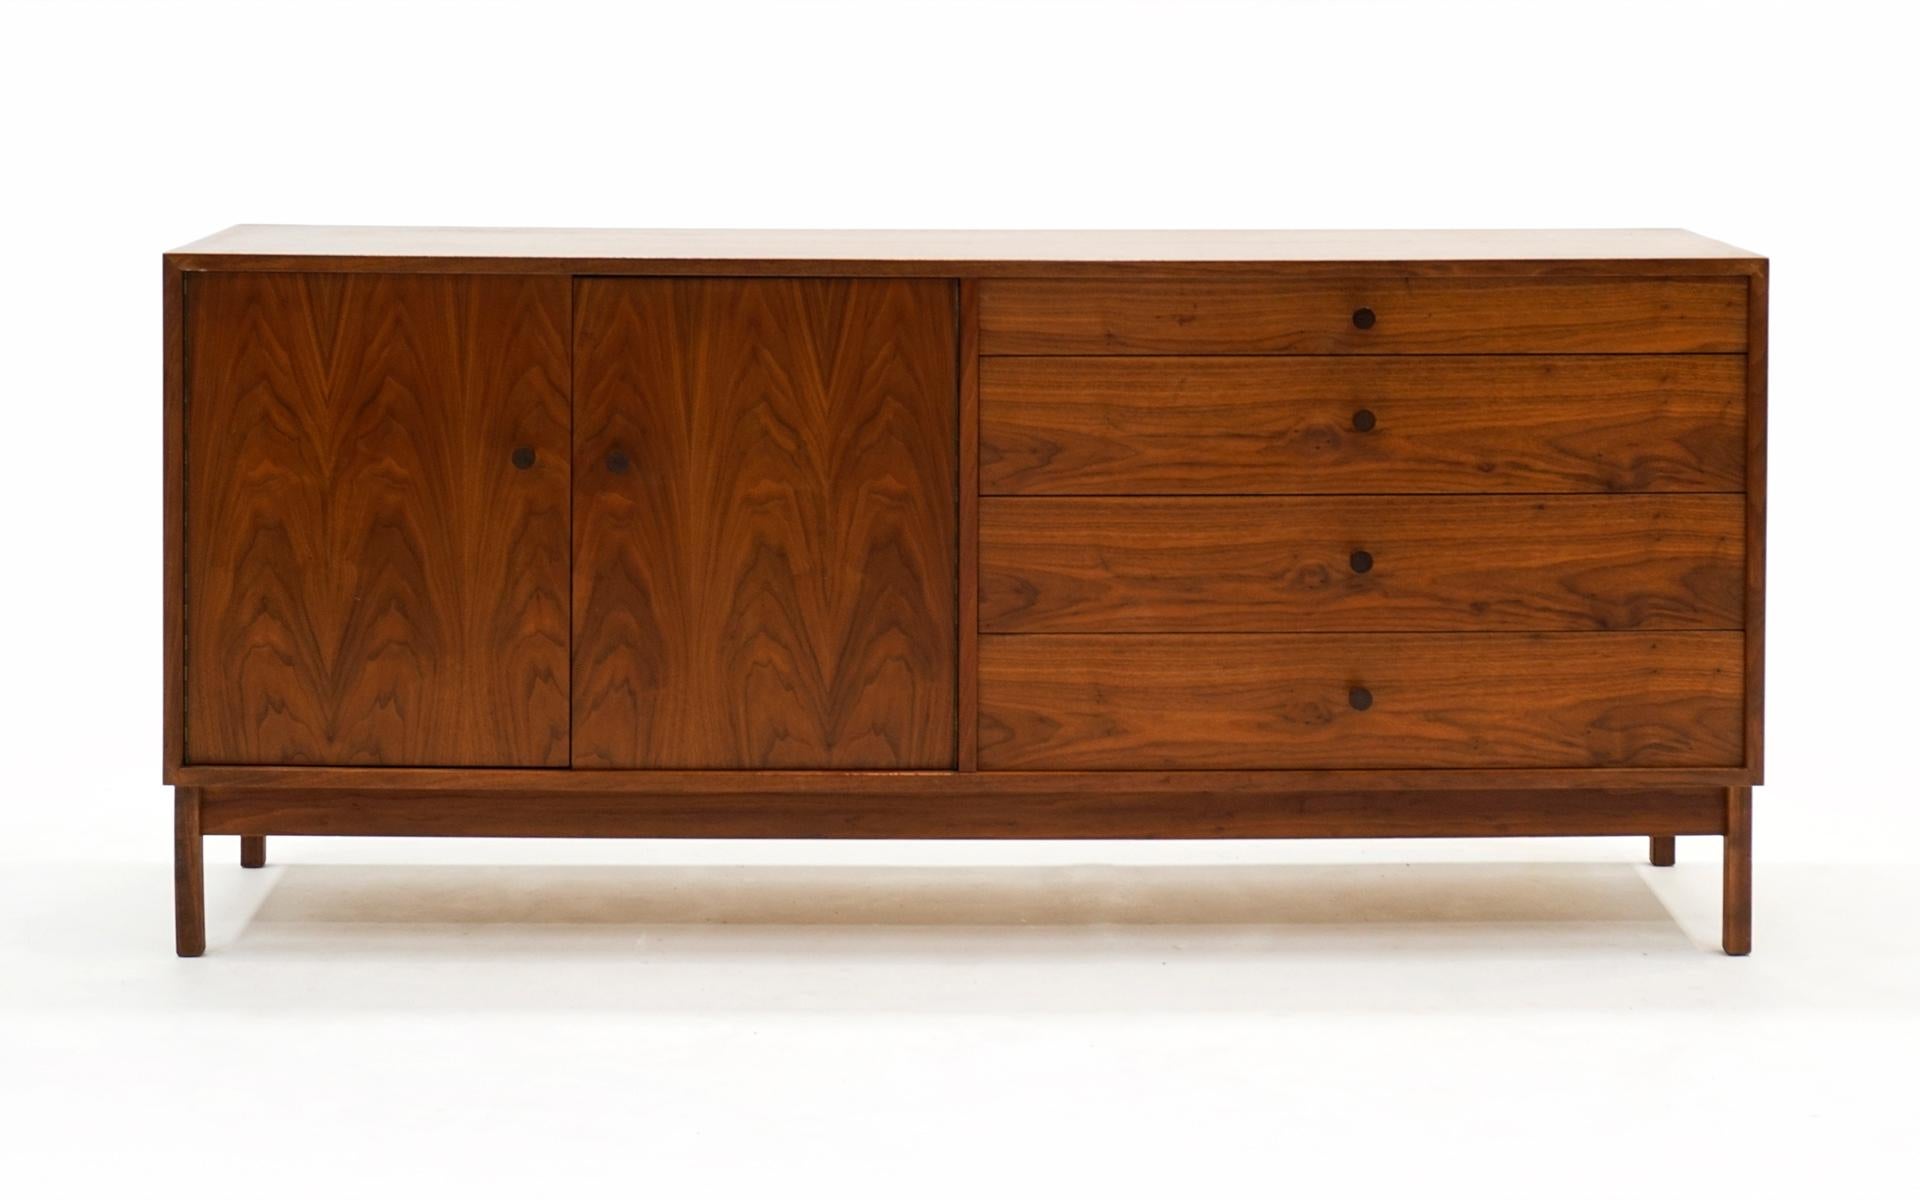 Walnut storage cabinet with rosewood pulls with four drawers and two doors revealing an adjustable shelf in the style of Milo Baughman for Glenn of California, 1960s. Beautiful figuring in the wood. Very good, completely original condition. No